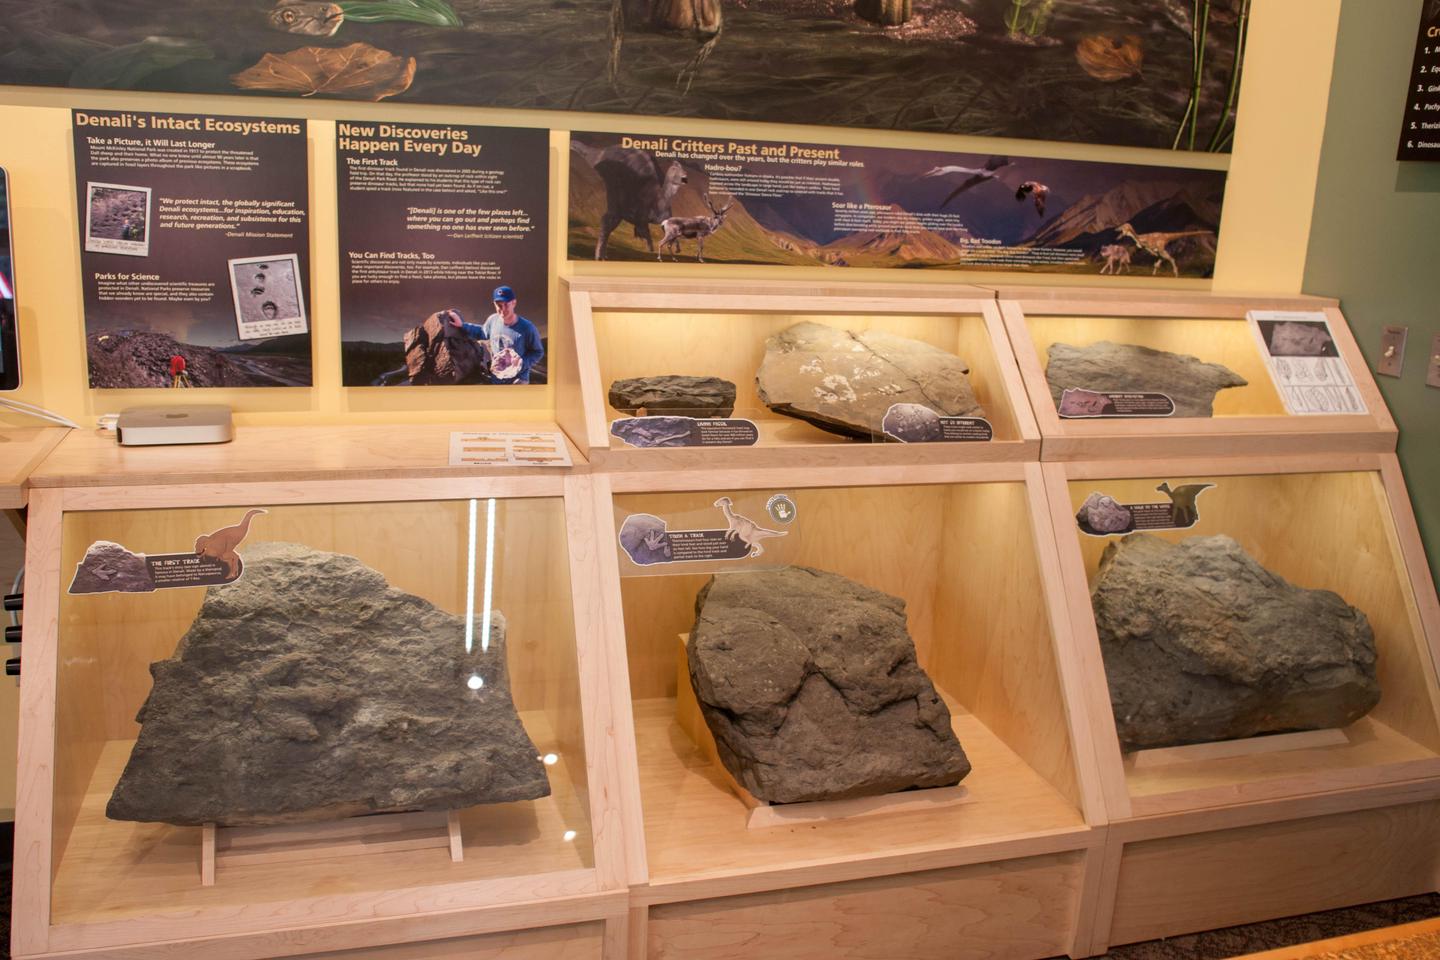 MSLC dino exhibitLearn about Denali's dinosaurs and touch a real dinosaur track inside the MSLC.